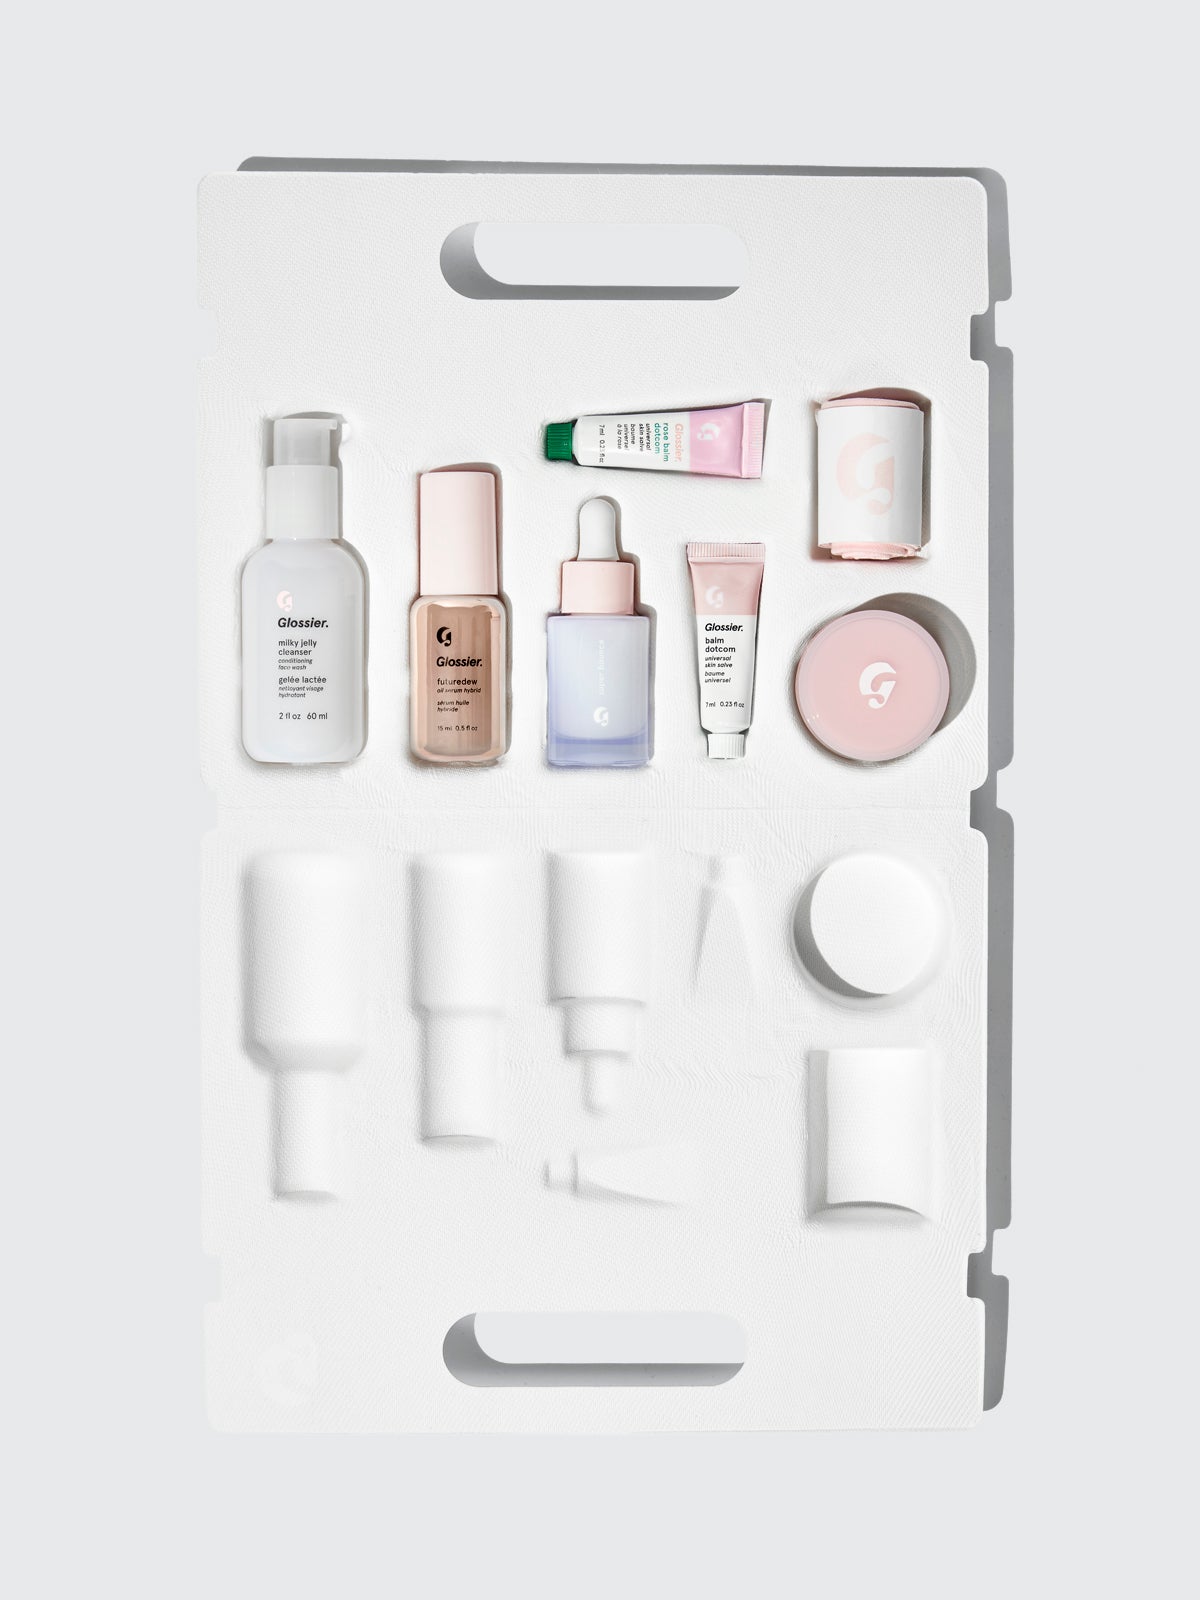 Glossier Just Launched Its First-Ever Holiday Skin Care Kit For 2019